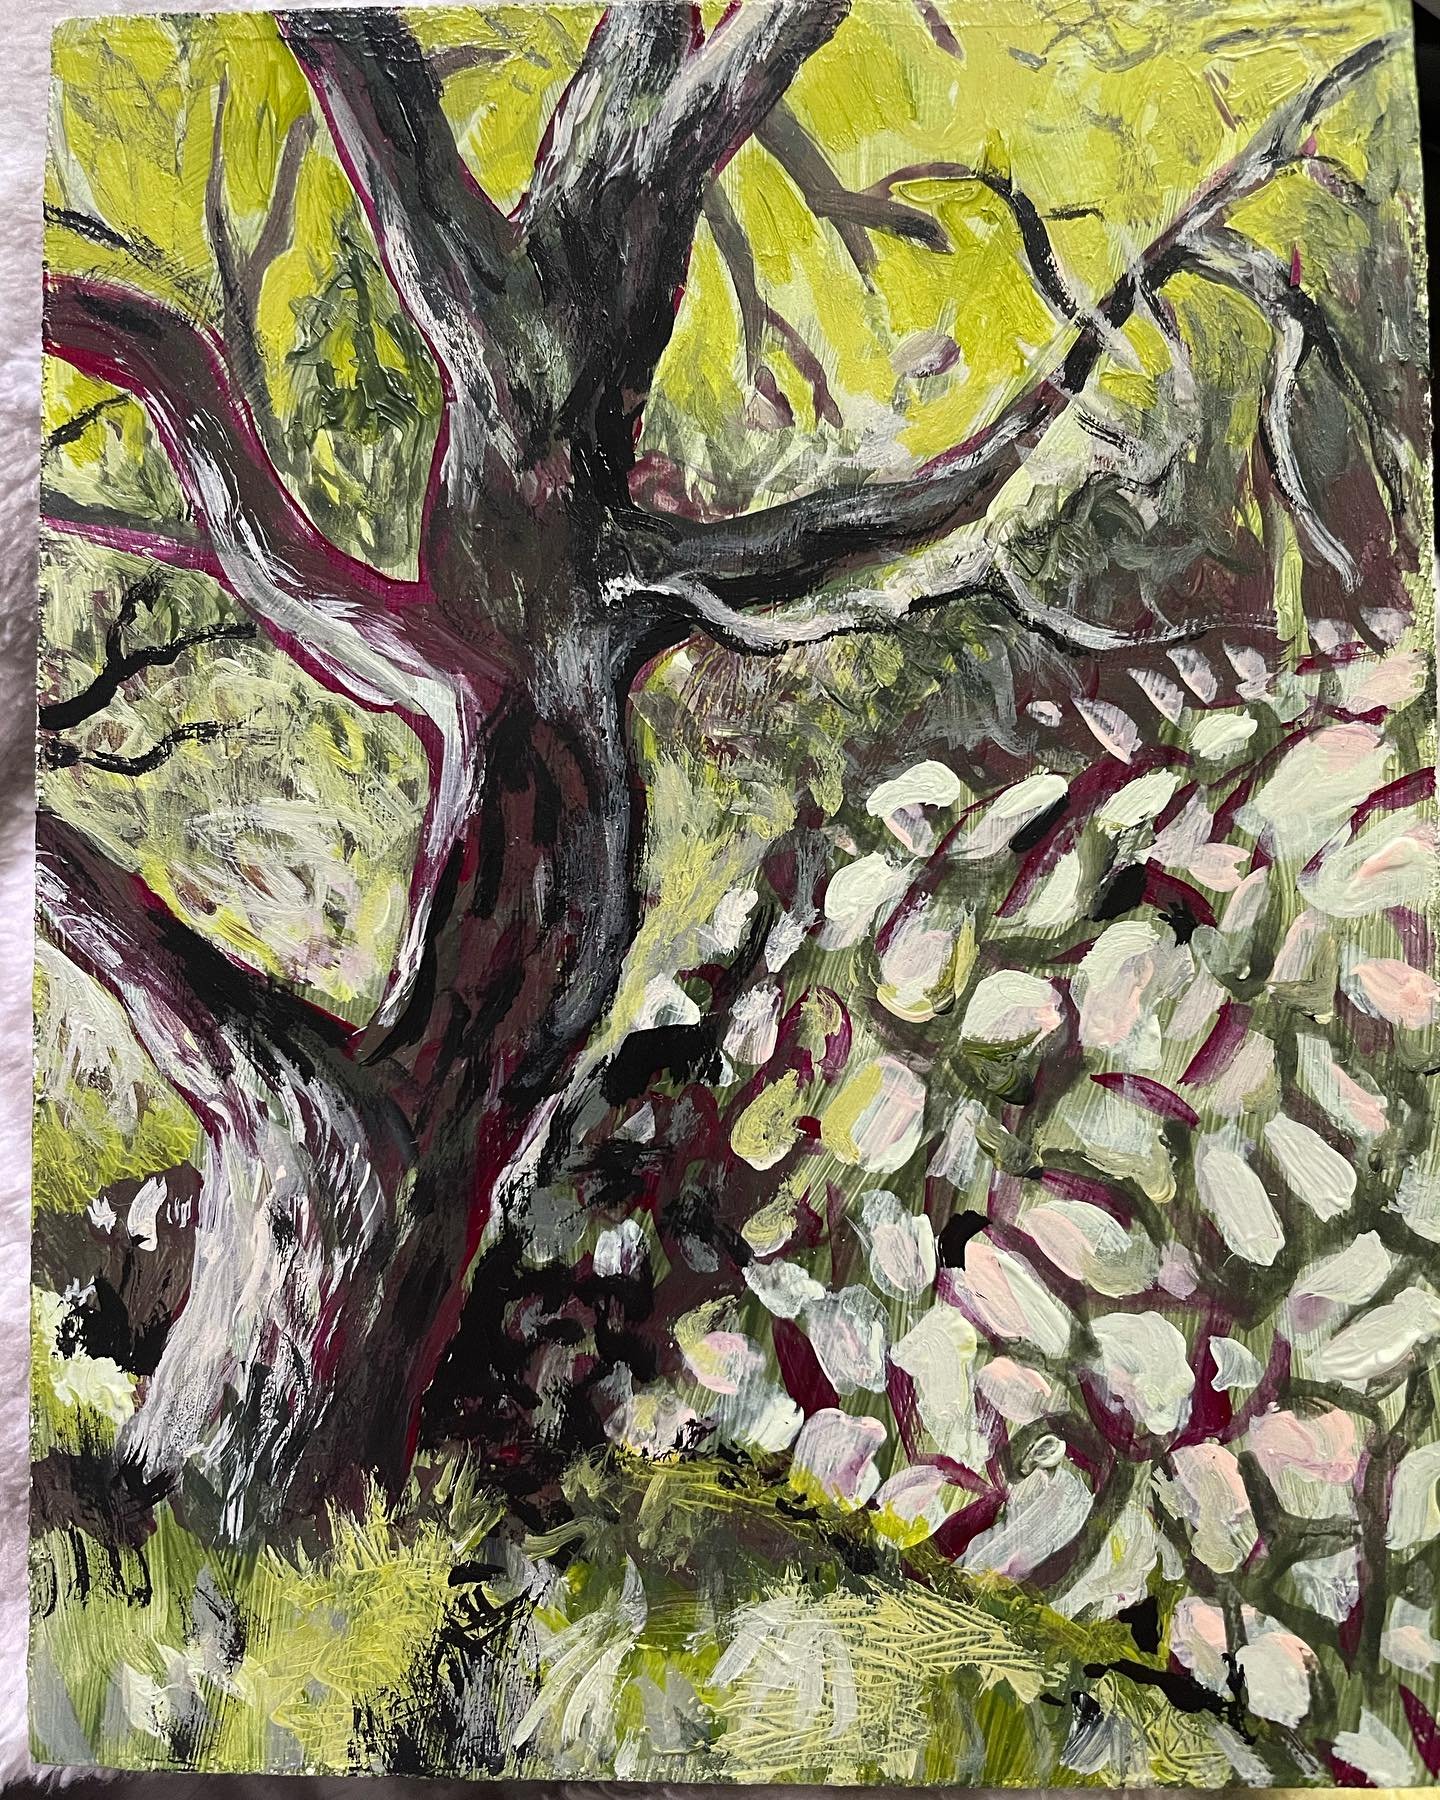 Obstacles can be guides. That&rsquo;s what I see when I see how this oak tree curves against and almost hugs the stone wall. #oaktrees #stone walls panel painting